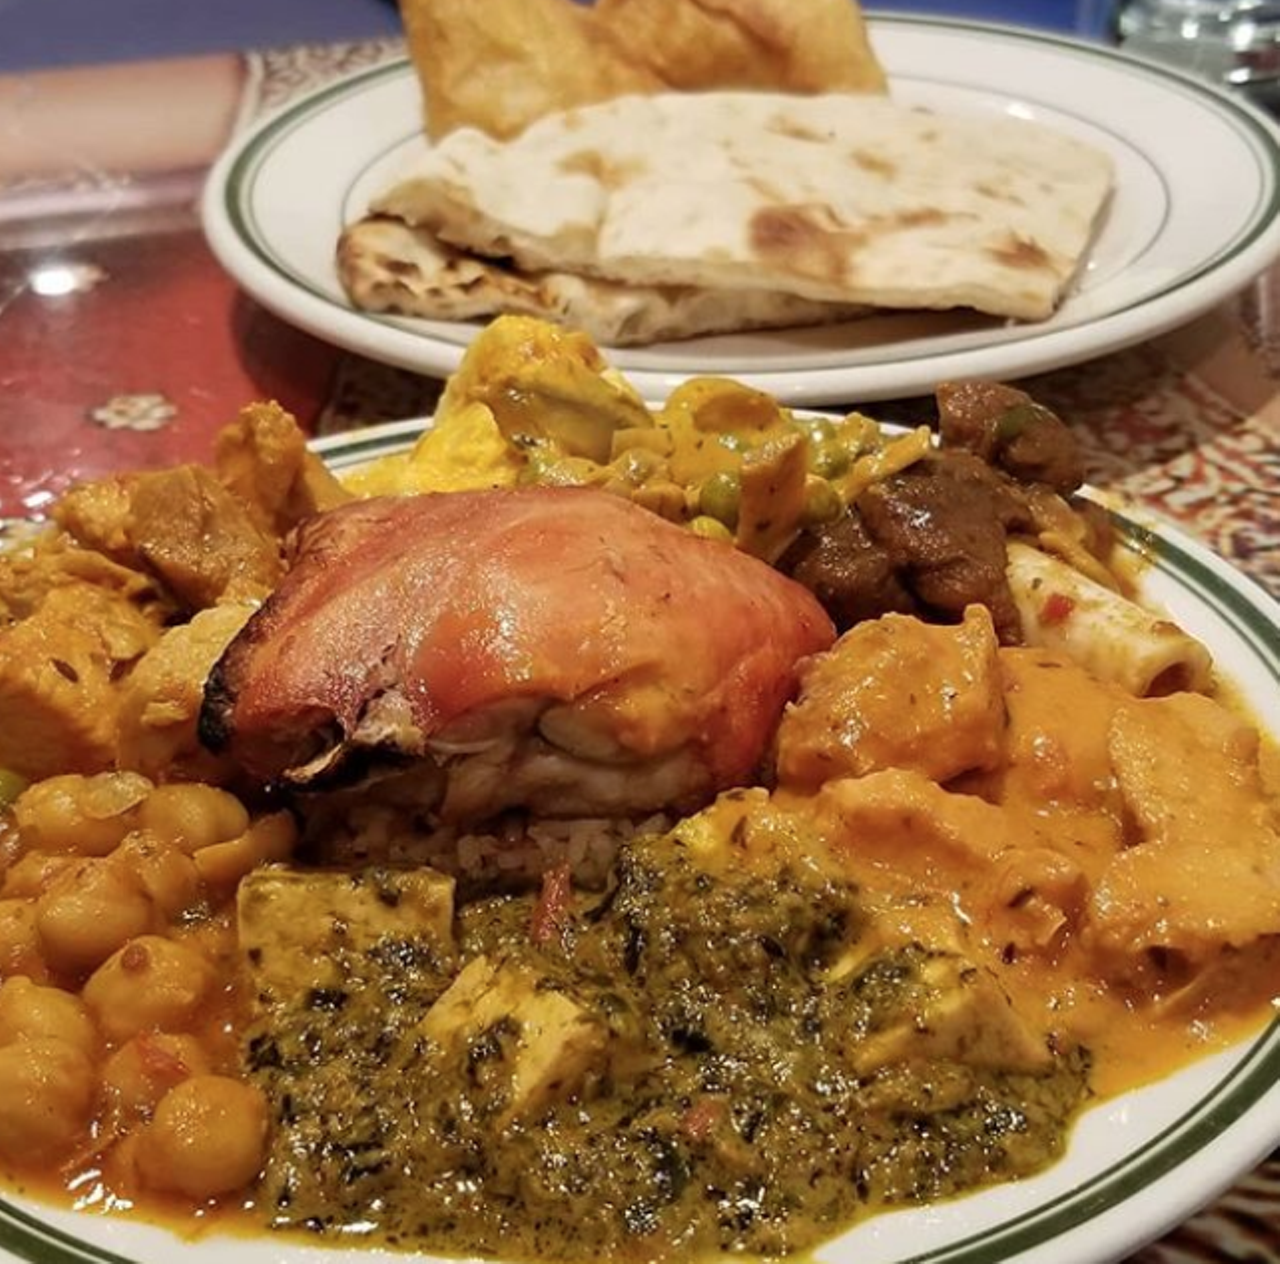 India Palace
8474 Fredericksburg Road, (210) 692-5262, indiapalacesatx.com
Specializing in North Indian fare, this Medical Center mainstay for both vegetarian and meaty dishes of the cuisine. Be prepared to get stuffed — and to enjoy every bite of your feast.
Photo via Instagram / rabidmeerkat